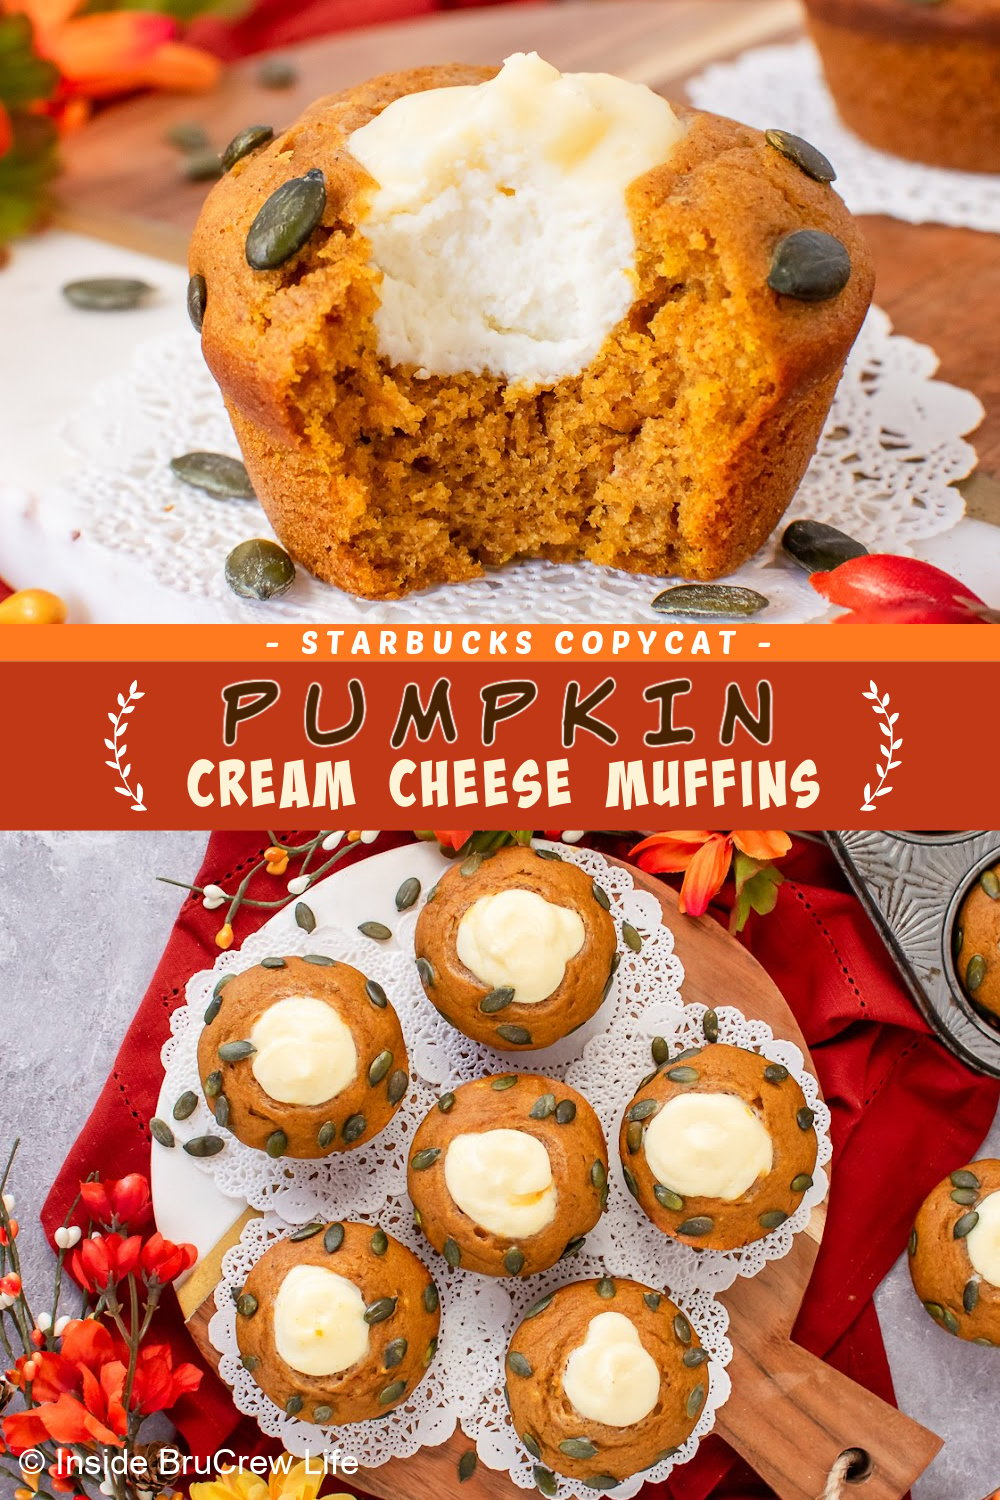 Two pictures of pumpkin cream cheese muffins collaged with an orange text box.